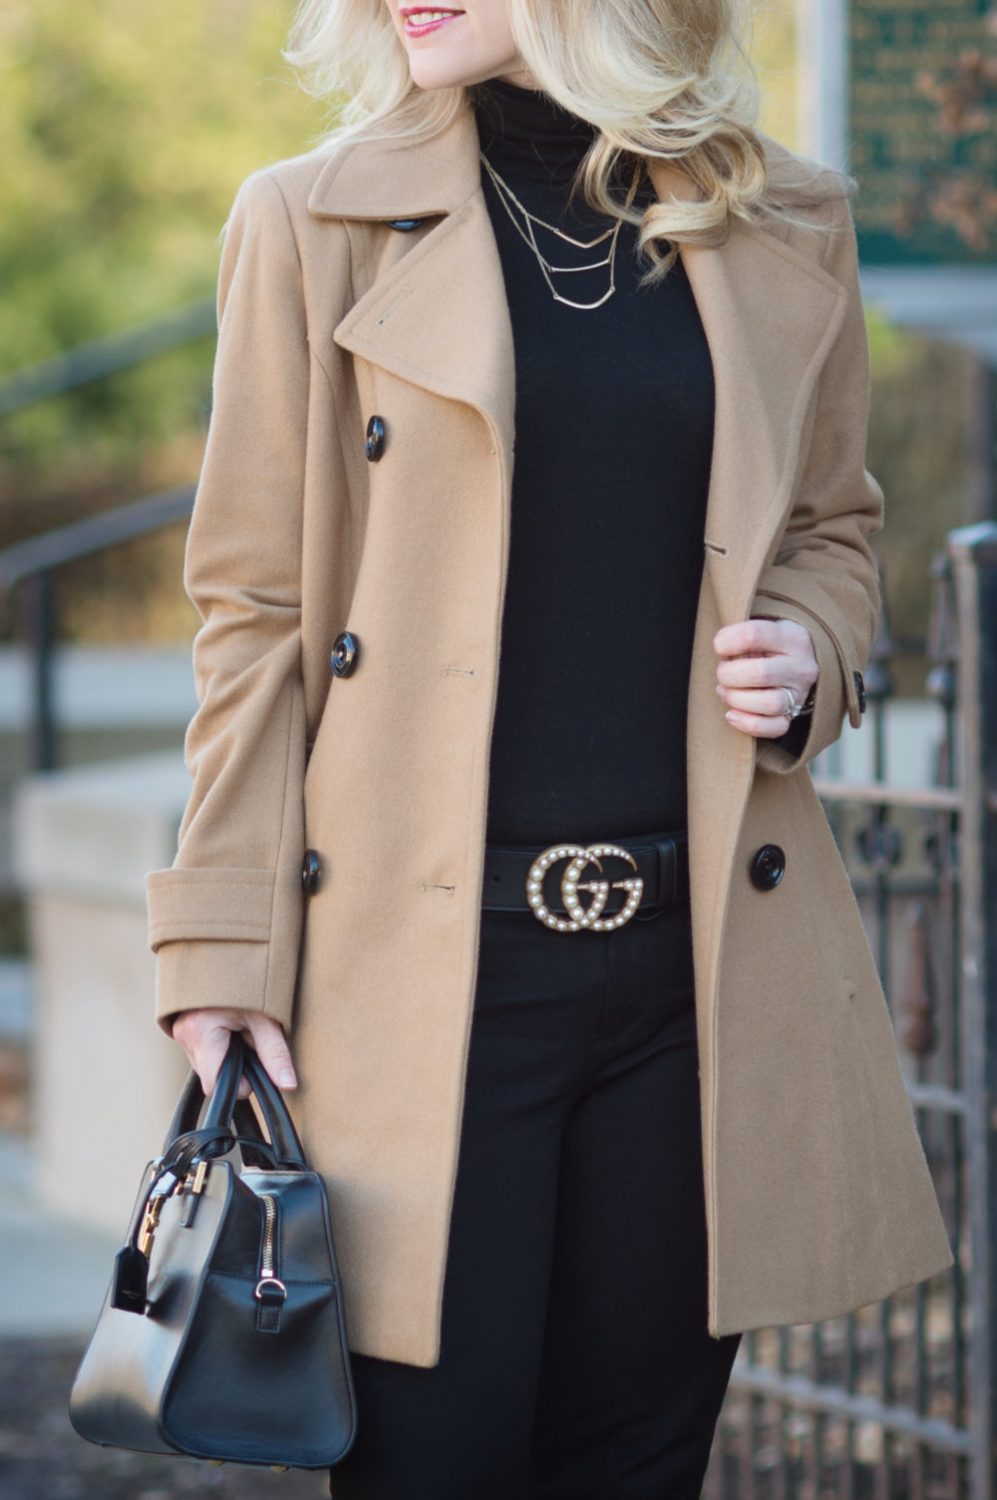 42 Winter Fashionable Outfits Ideas for Women - The Finest Feed